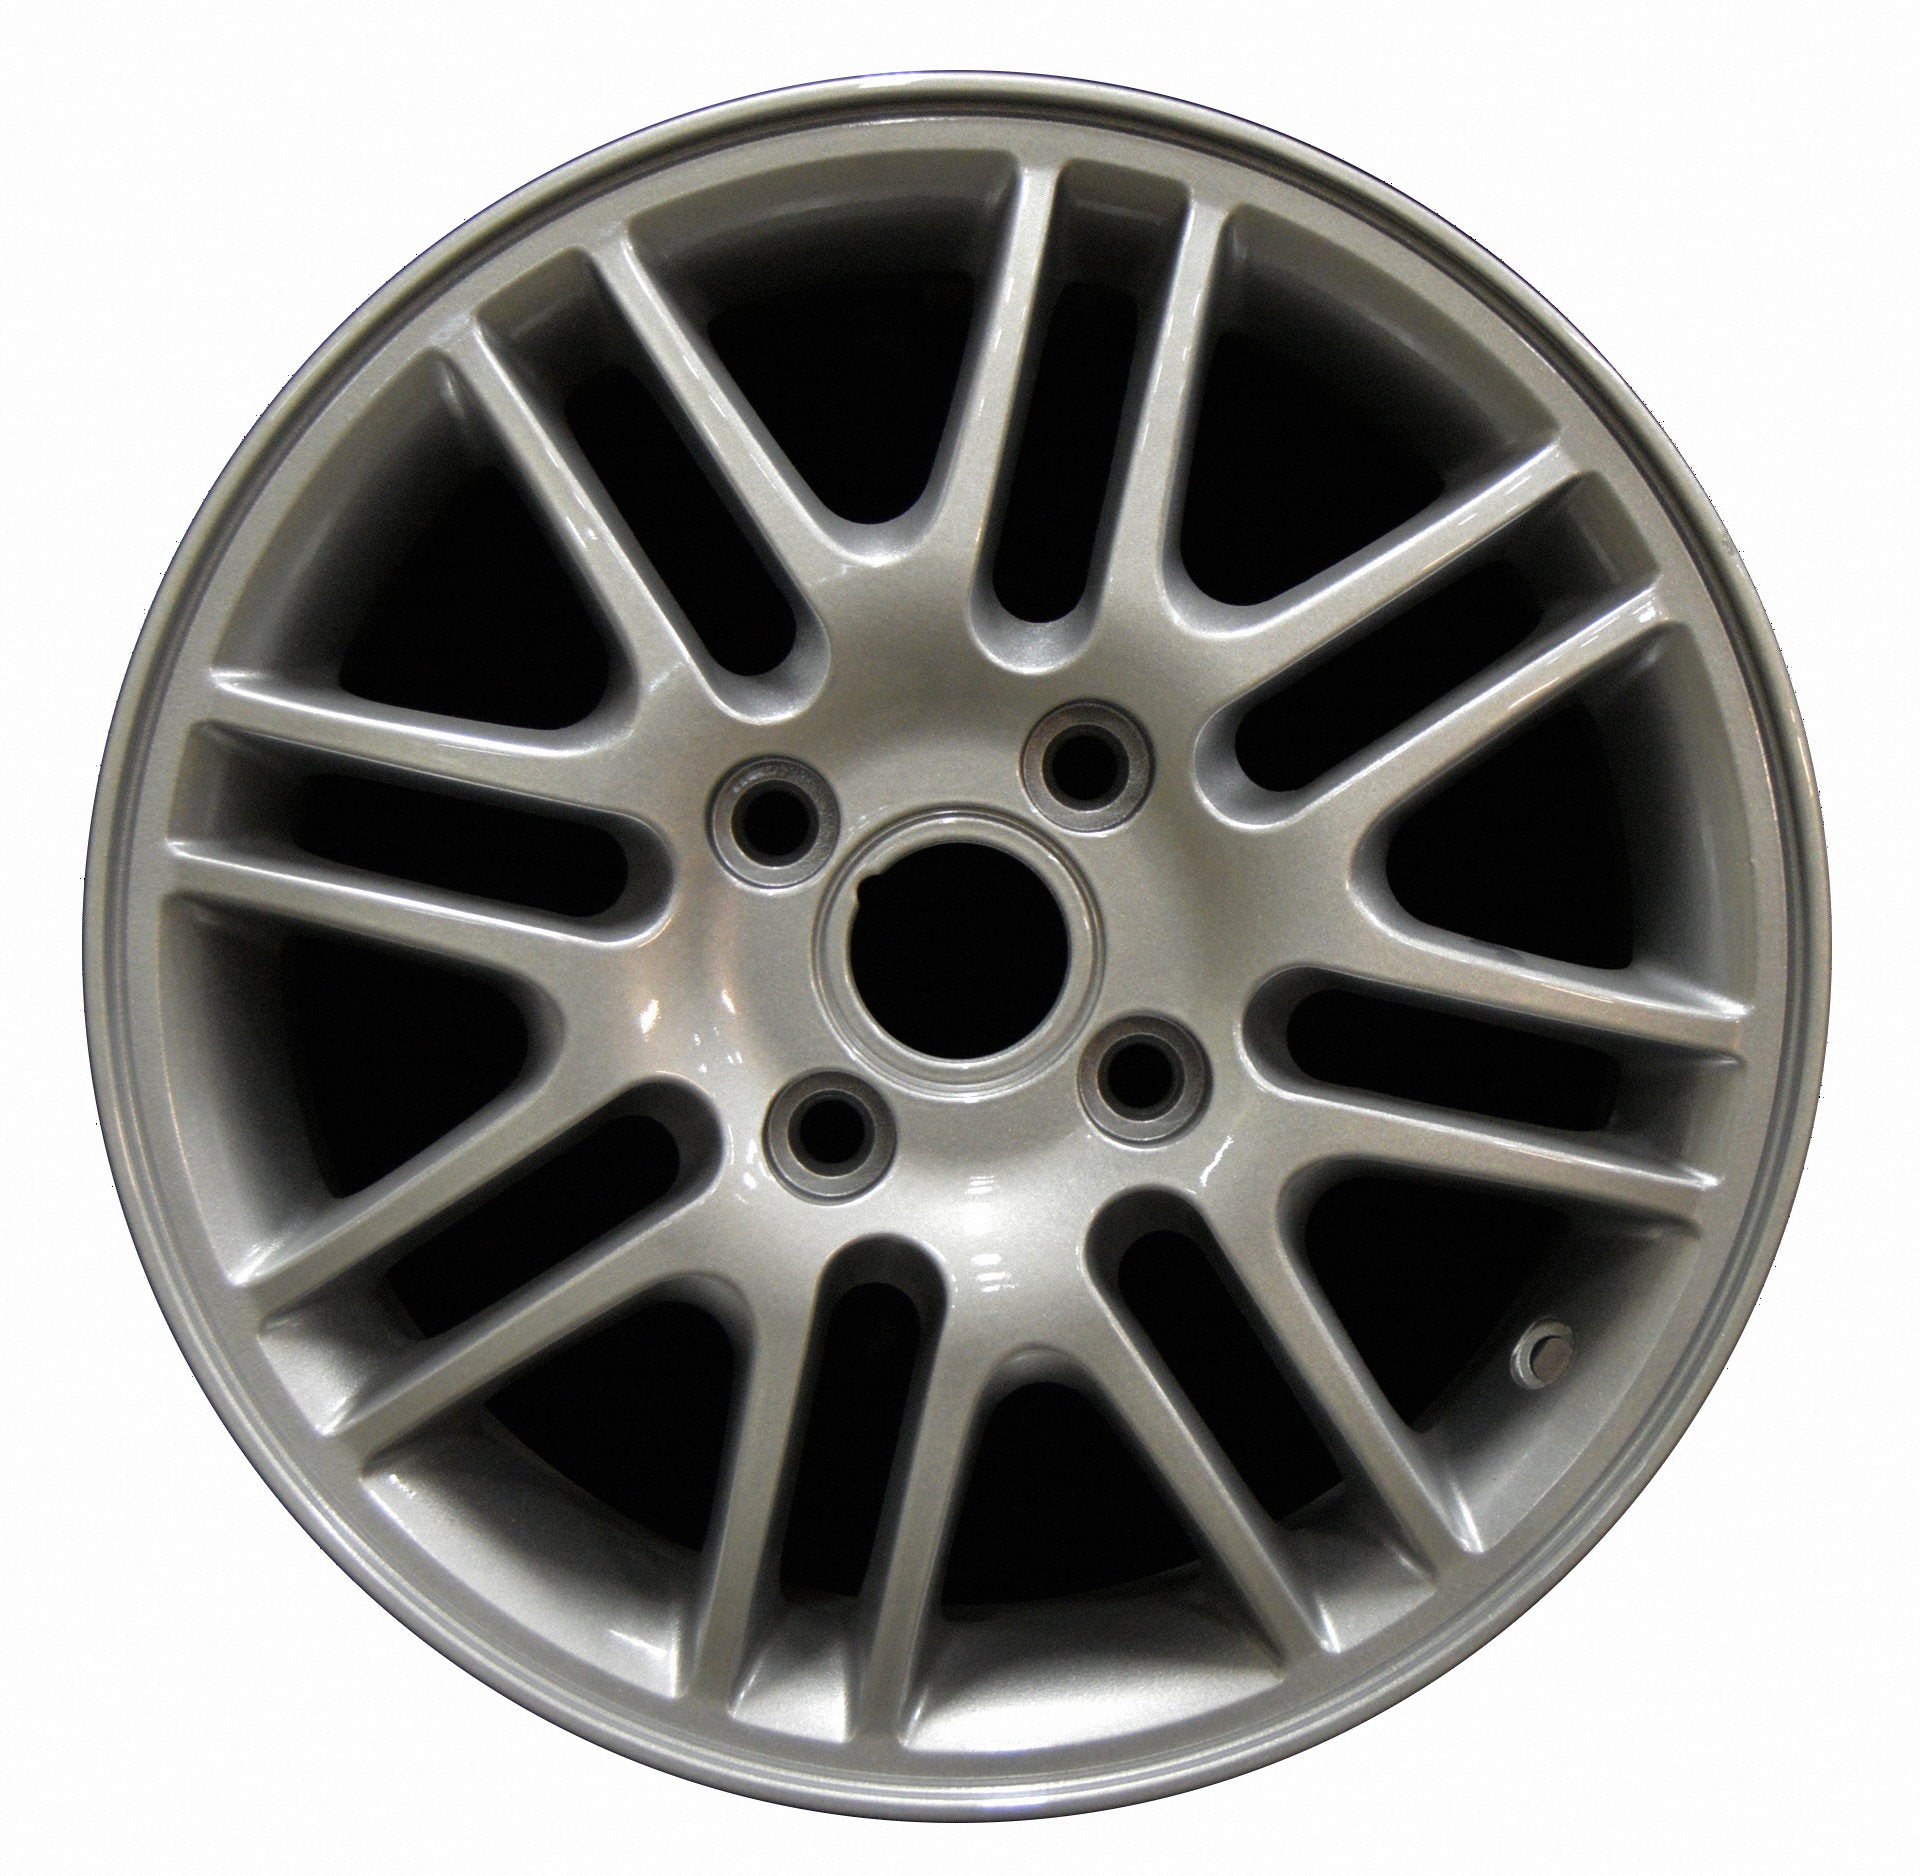 Ford Focus  2000, 2001, 2002, 2003, 2004, 2005, 2006, 2007, 2008, 2009, 2010, 2011 Factory OEM Car Wheel Size 15x6 Alloy WAO.3367A.PS02.FF